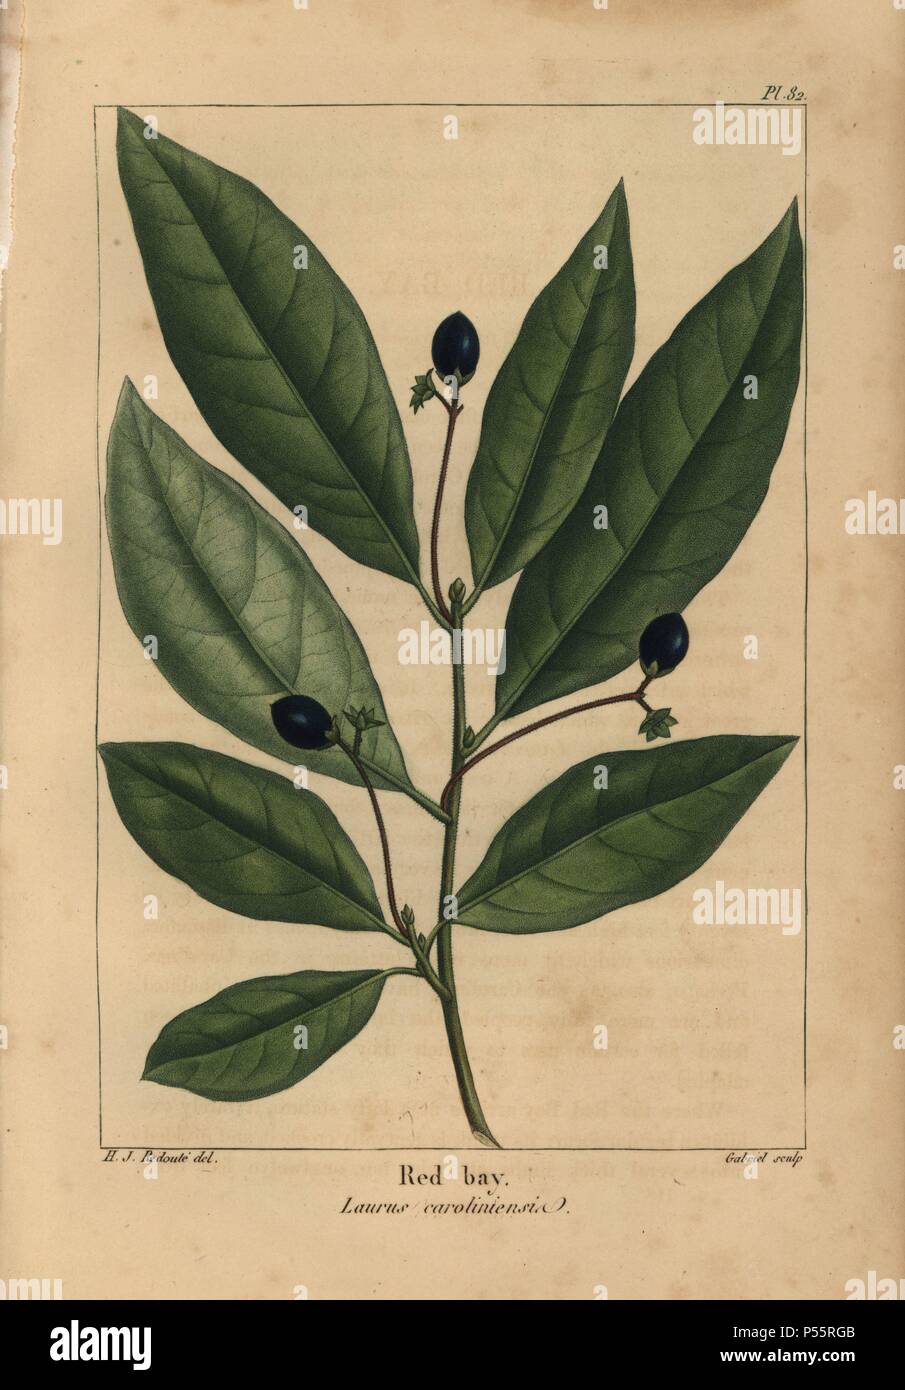 Leaves and seeds of the red bay tree, Laurus caroliniensis. Handcolored stipple engraving from a botanical illustration by Henri Joseph Redoute, engraved on copper by Gabriel, from Francois Andre Michaux's 'North American Sylva,' Philadelphia, 1857. French botanist Michaux (1770-1855) explored America and Canada in 1785 cataloging its native trees. Stock Photo